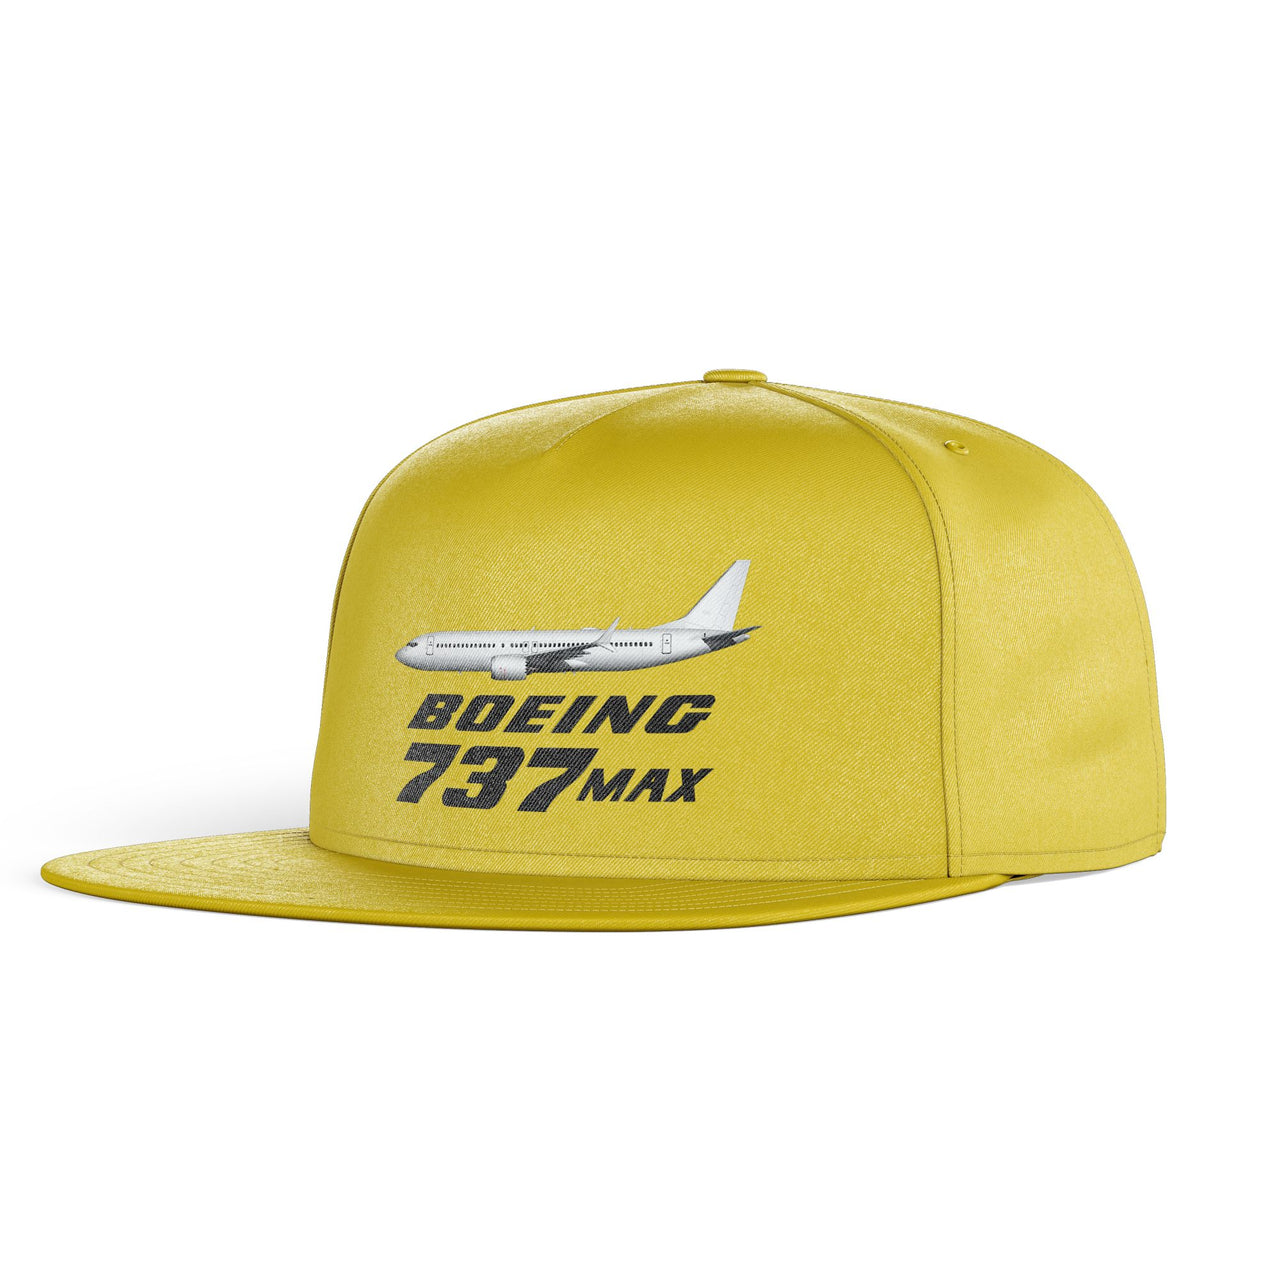 The Boeing 737Max Designed Snapback Caps & Hats